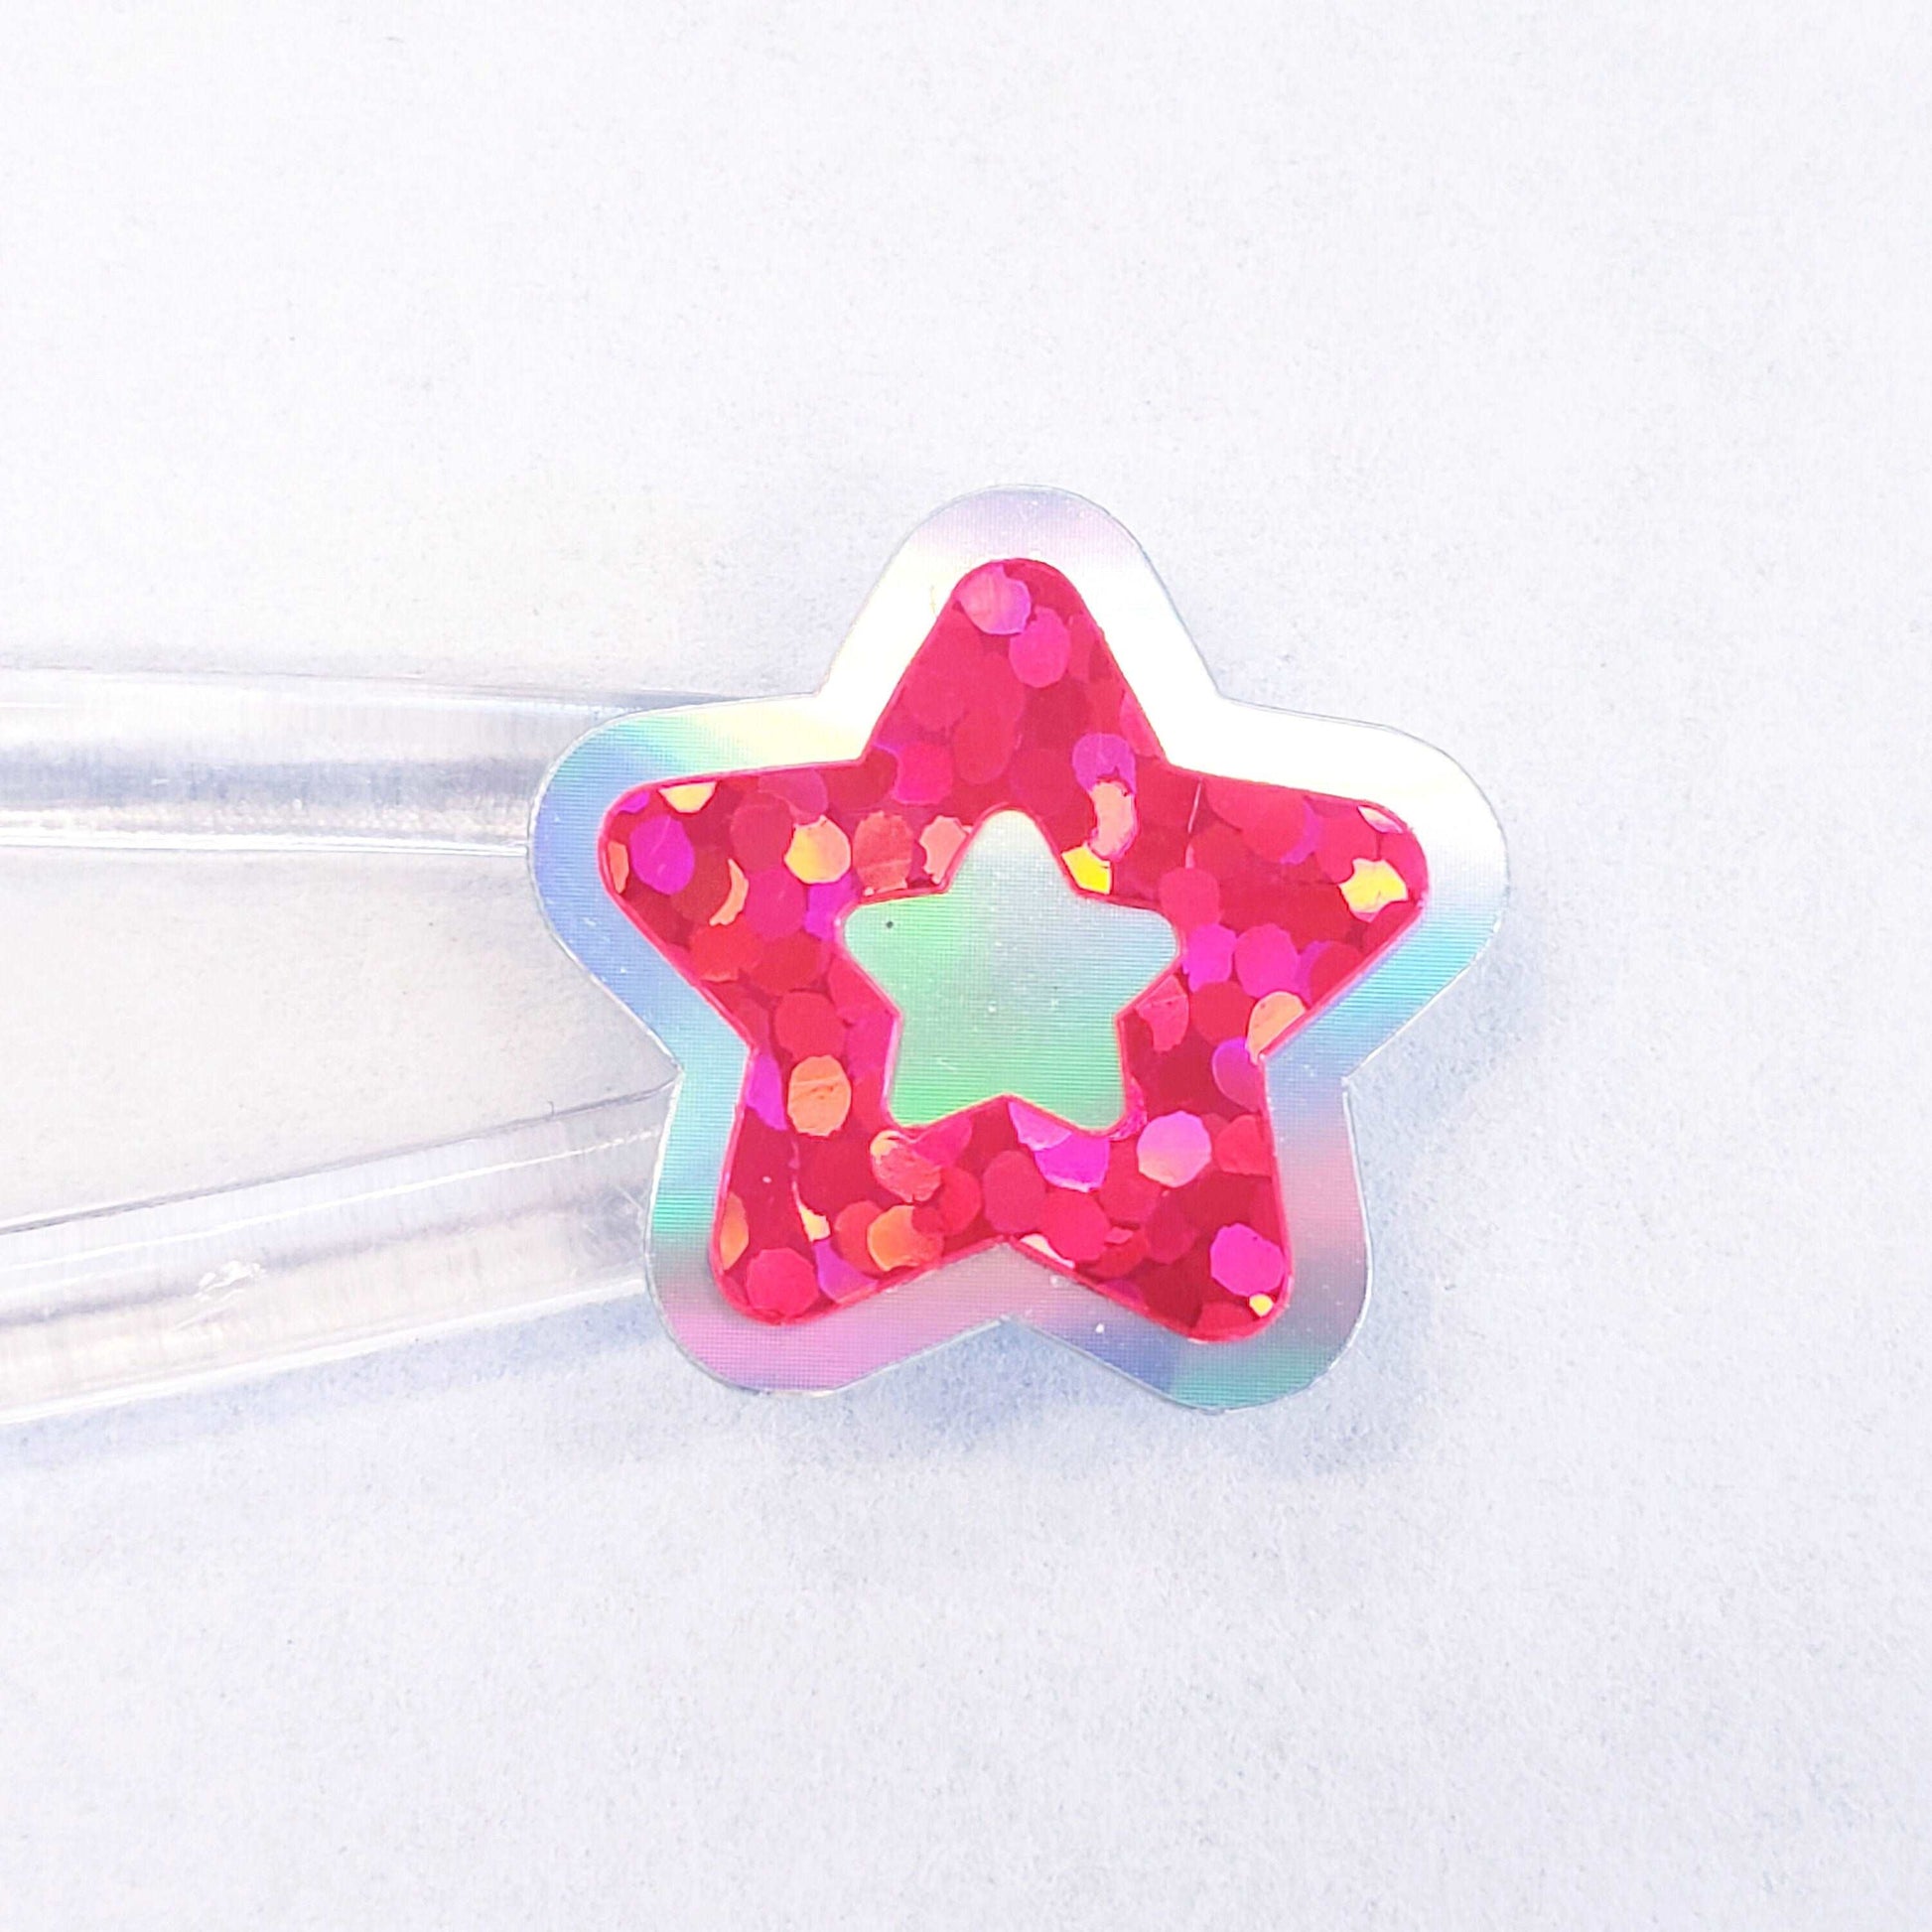 Neon Star Stickers, set of 70 small rainbow open star decals, bright glitter vinyl stars for laptops, planners and notebooks. Sticker gift.